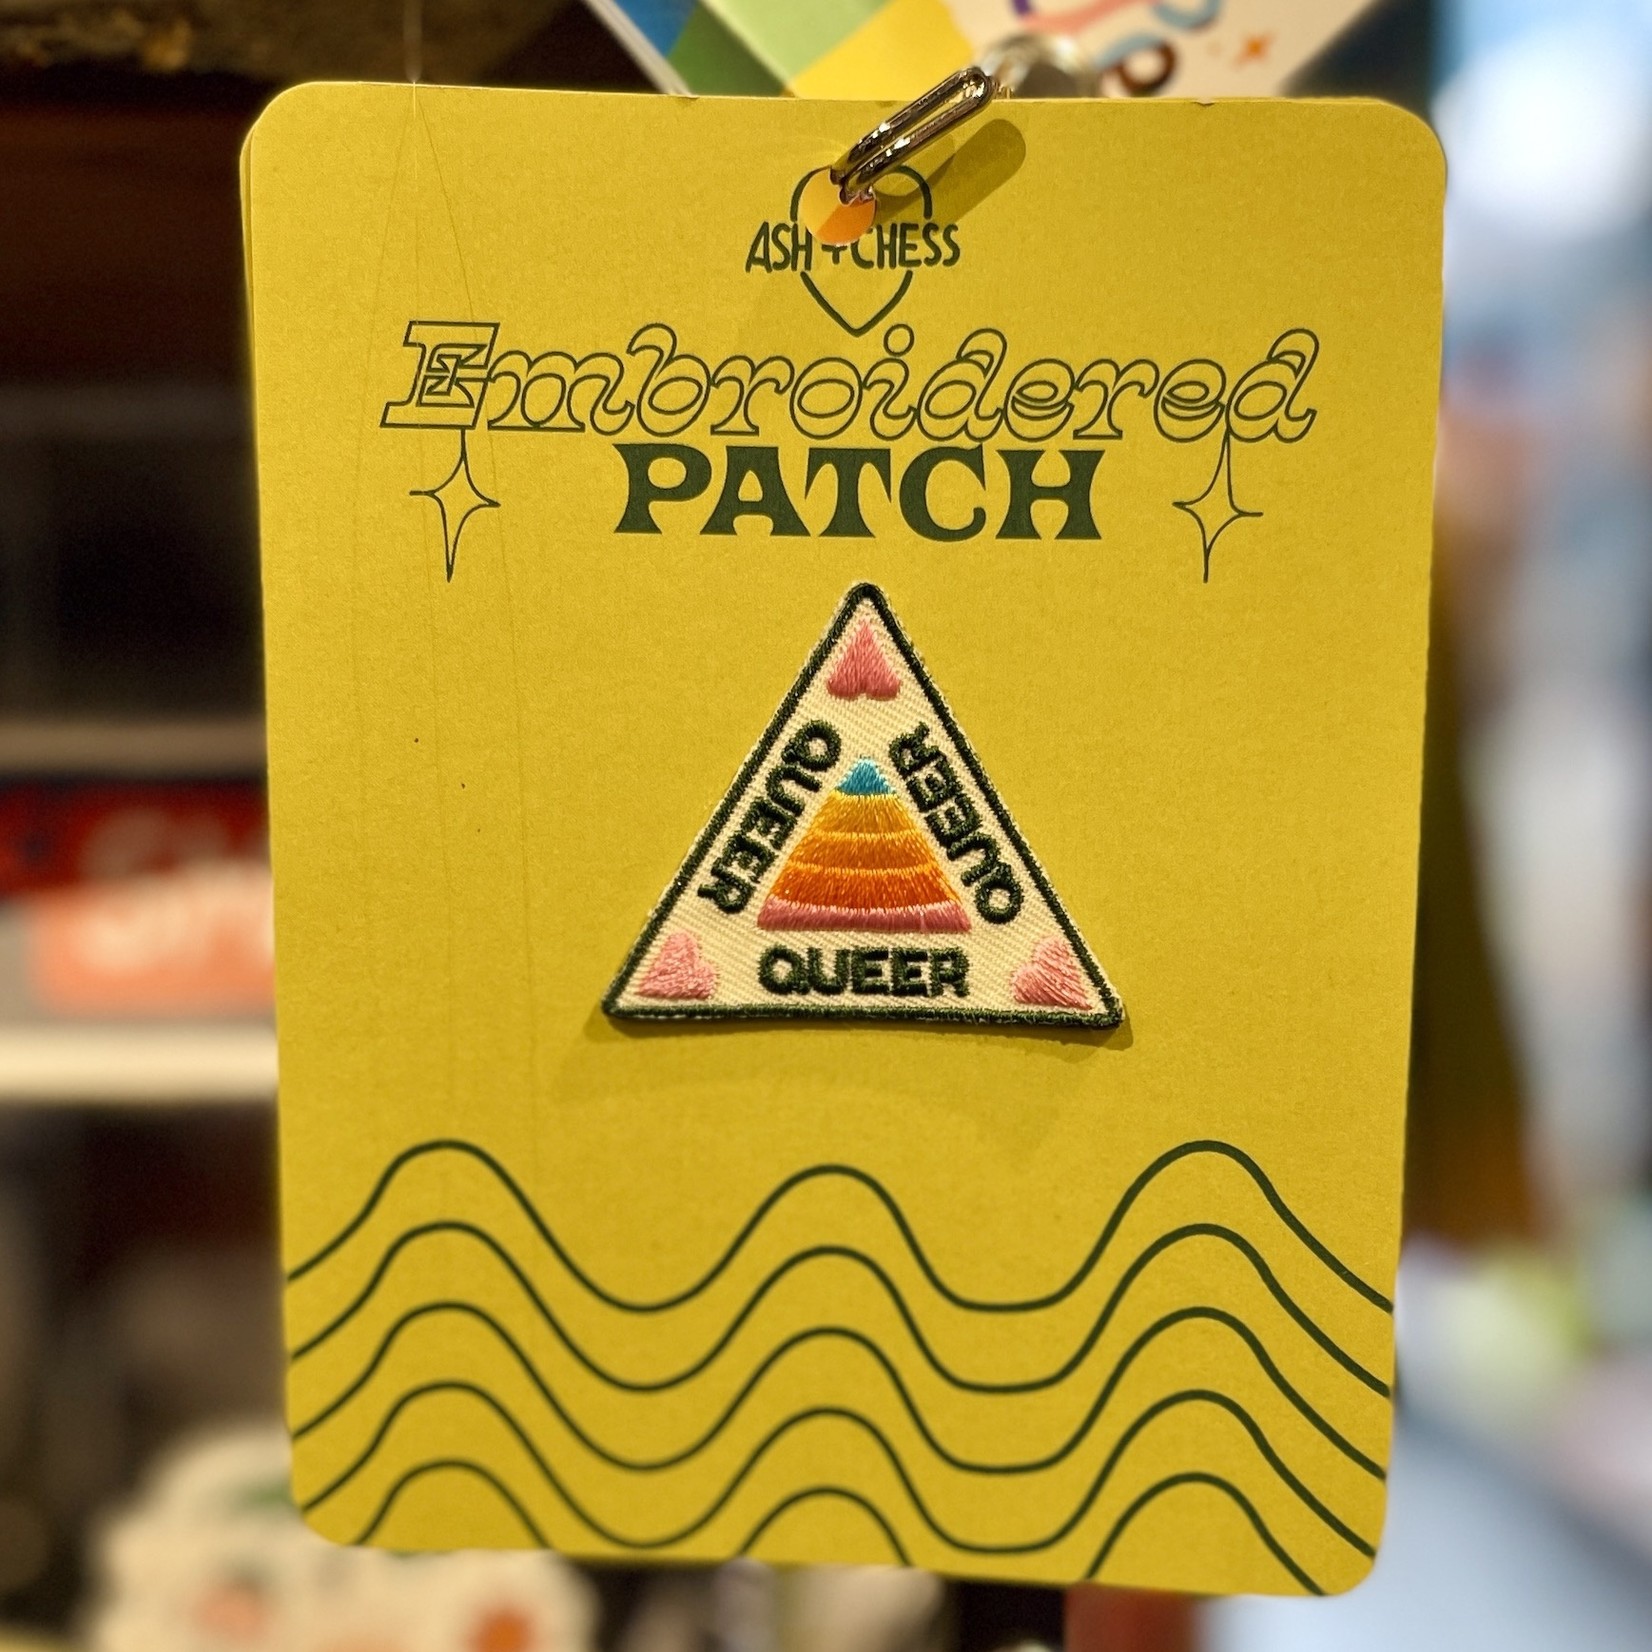 Ash + Chess Patch